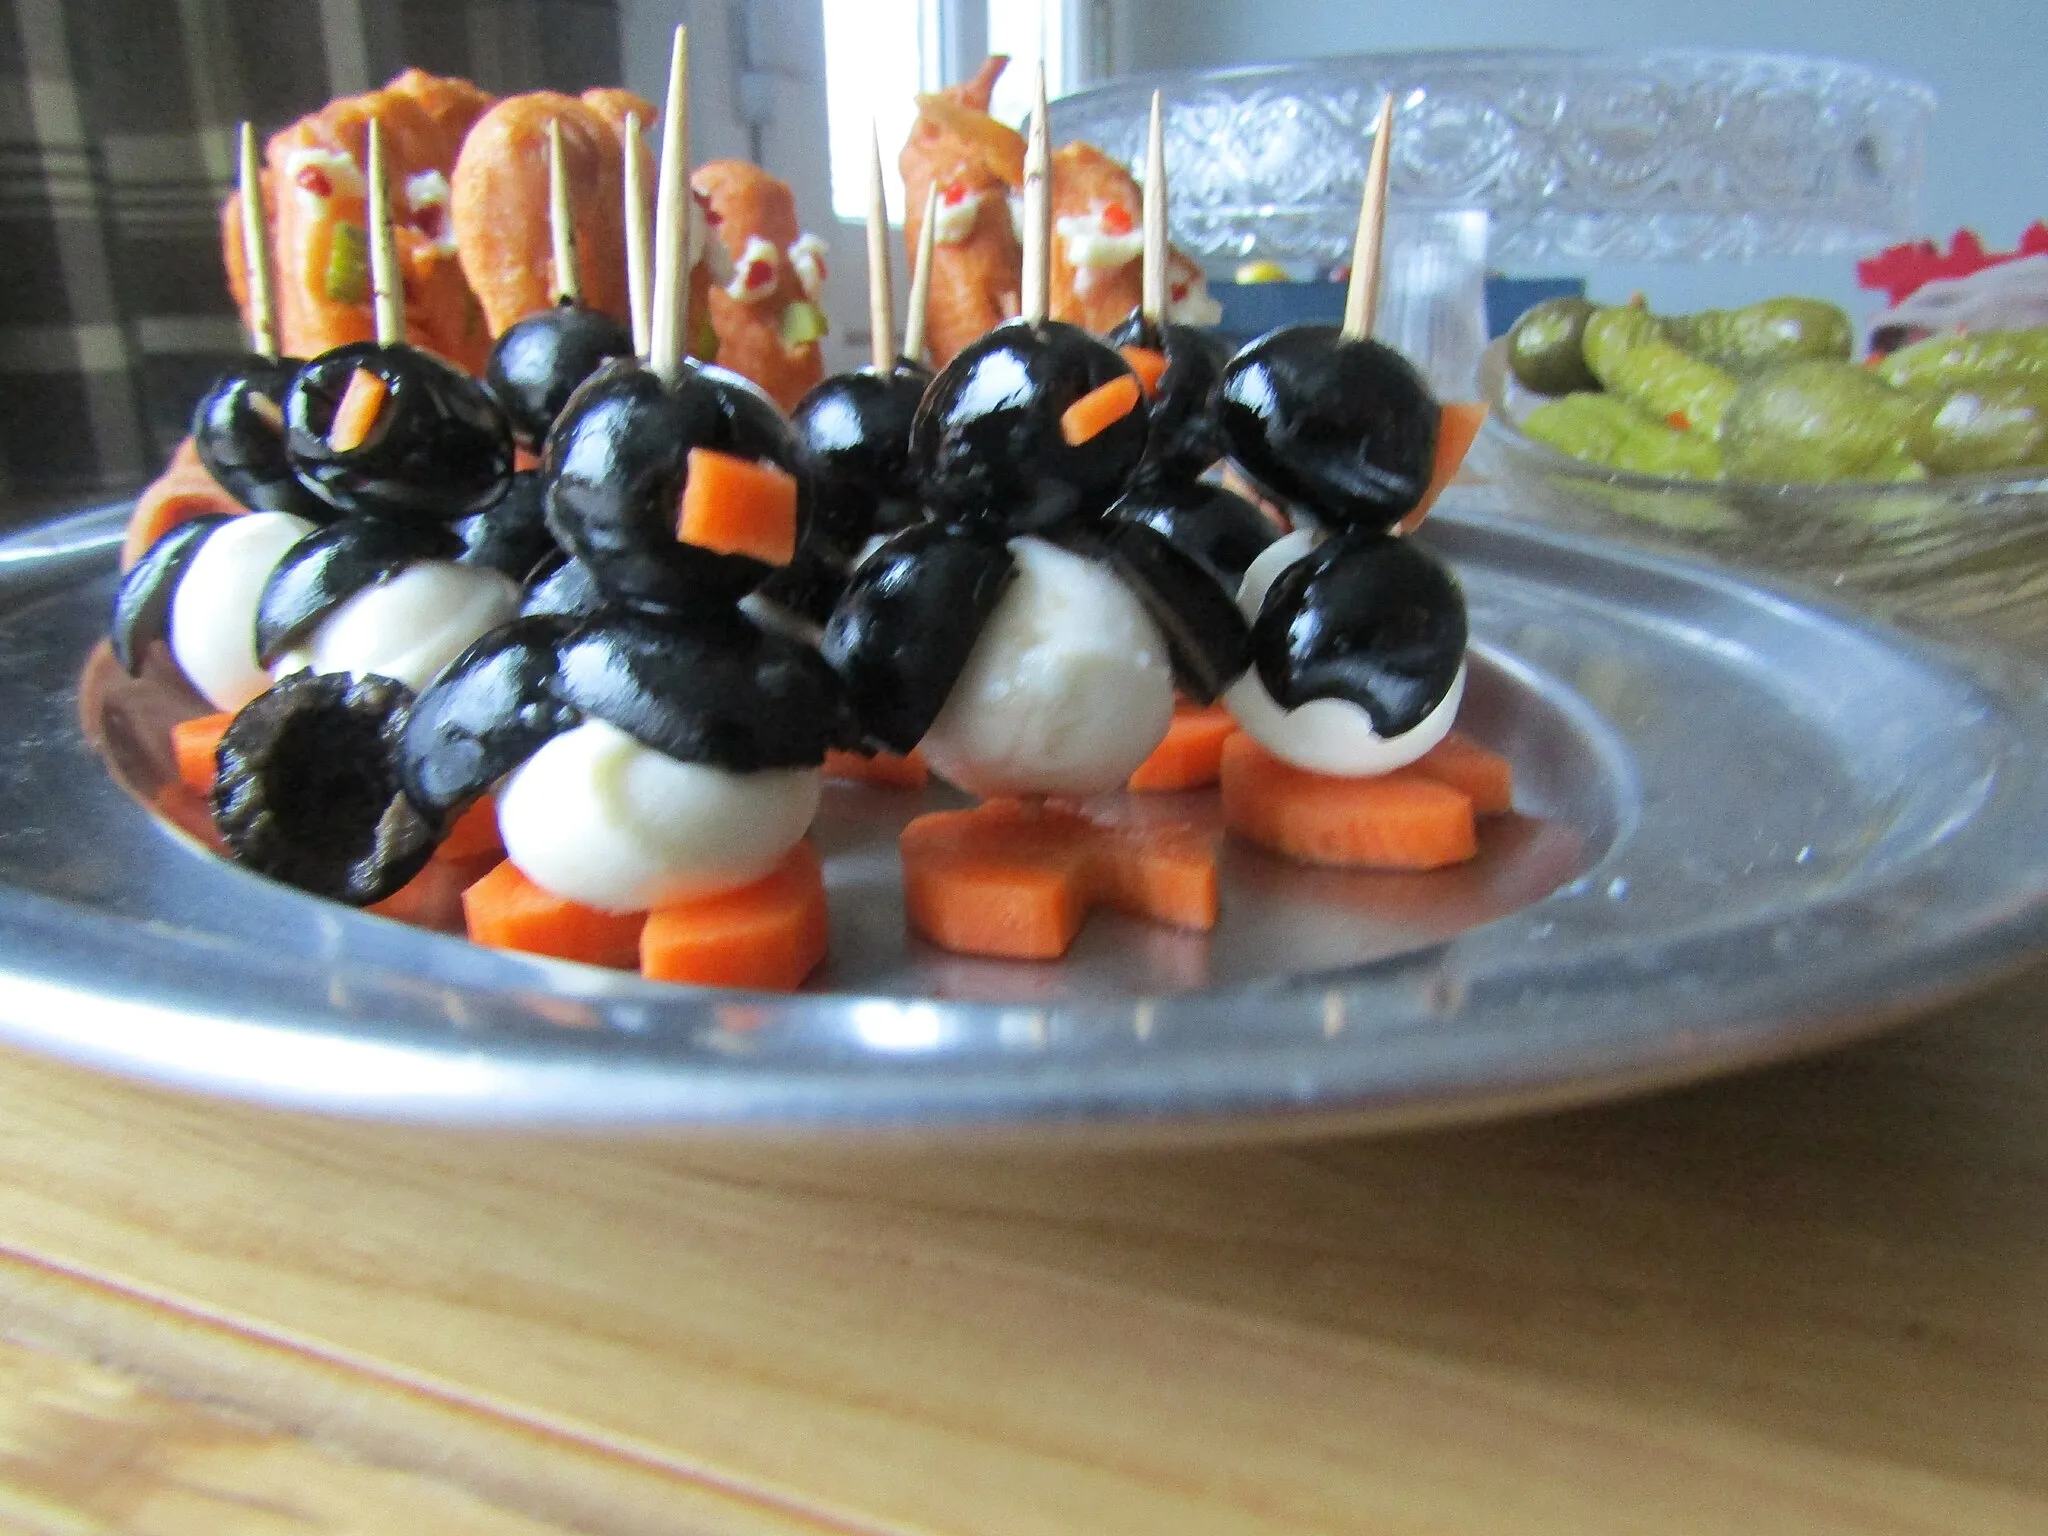 Photo showing: Penguins made of mozzarella, carrot and black olives, prepared for a New Years Eve party in the town of Cromer, Norfolk, England.